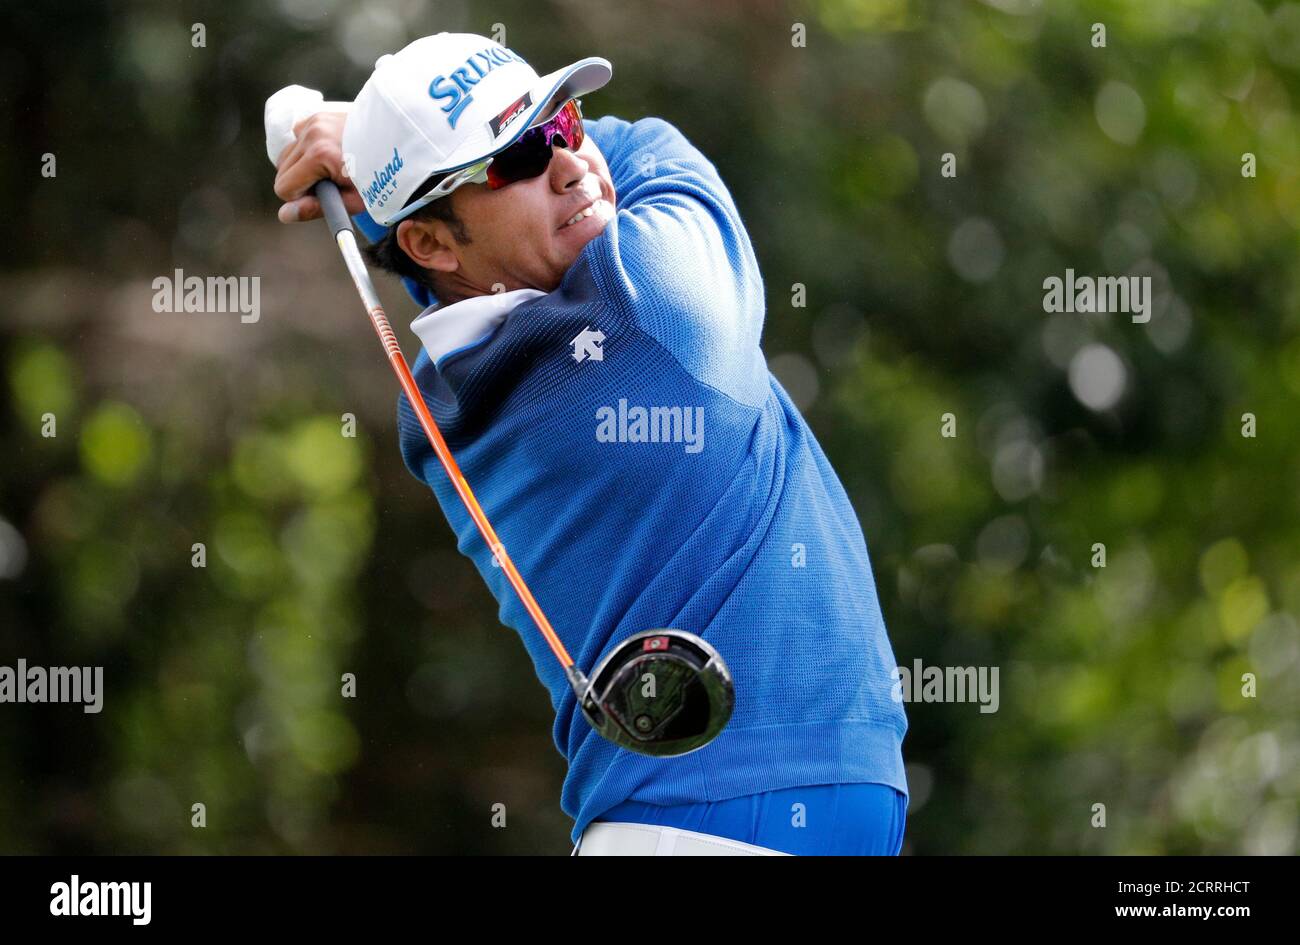 Hideki Matsuyama of Japan hits off the second tee in first round play during the 2017 Masters golf tournament at Augusta National Golf Club in Augusta, Georgia, U.S., April 6, 2017. REUTERS/Lucy Nicholson Stock Photo